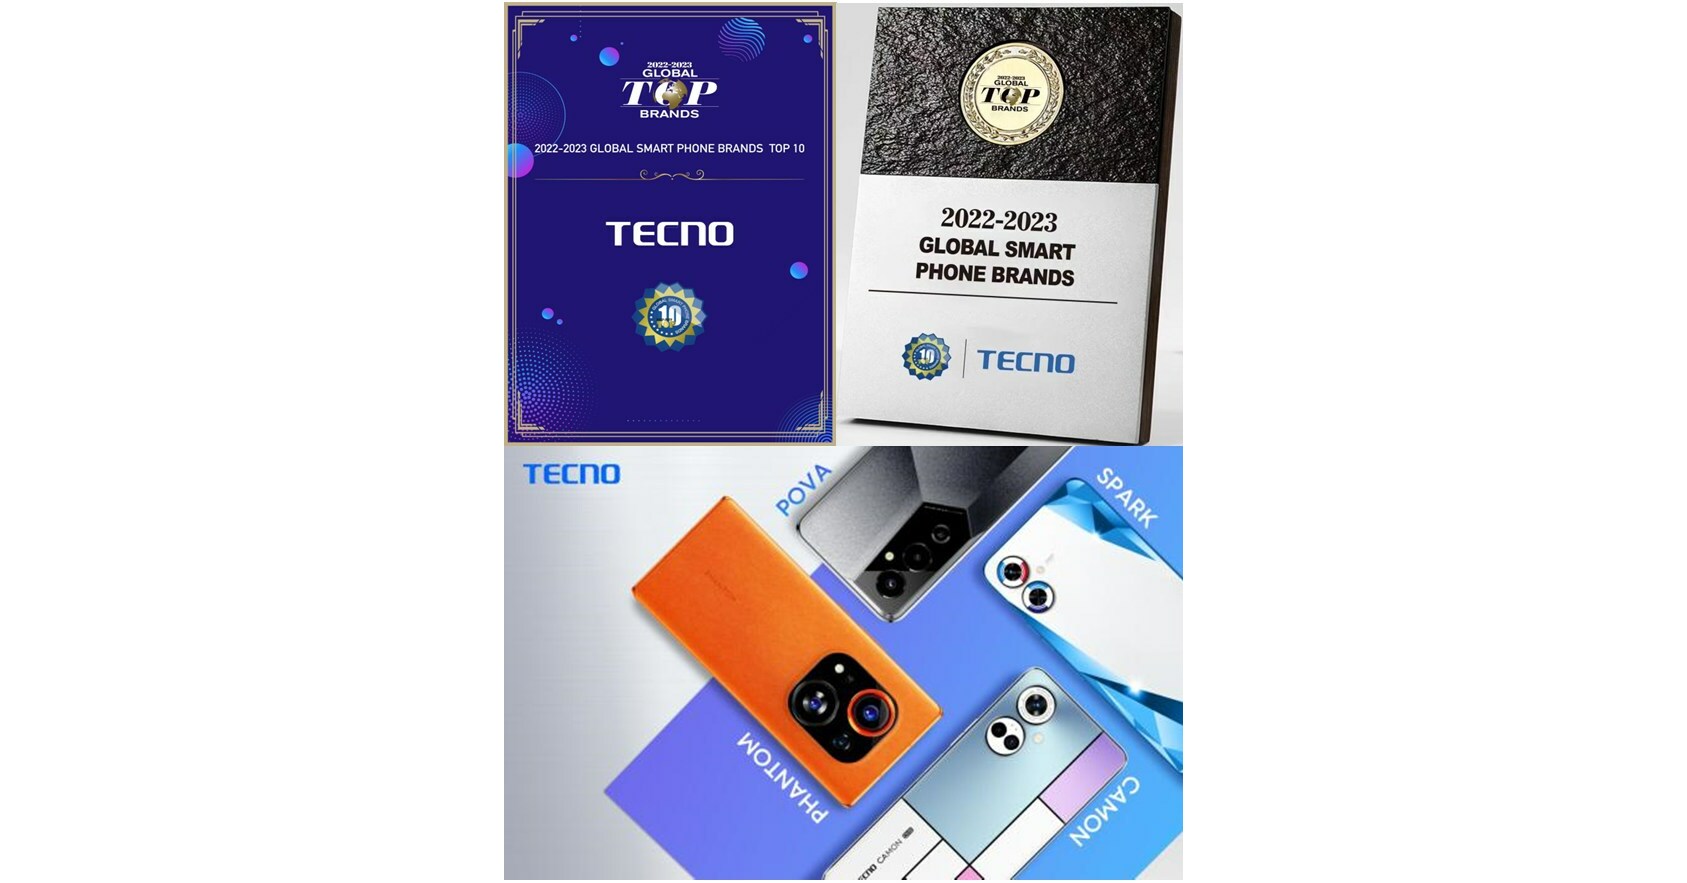 TECNO Awarded as 2022-2023 Global Top Brands at CES